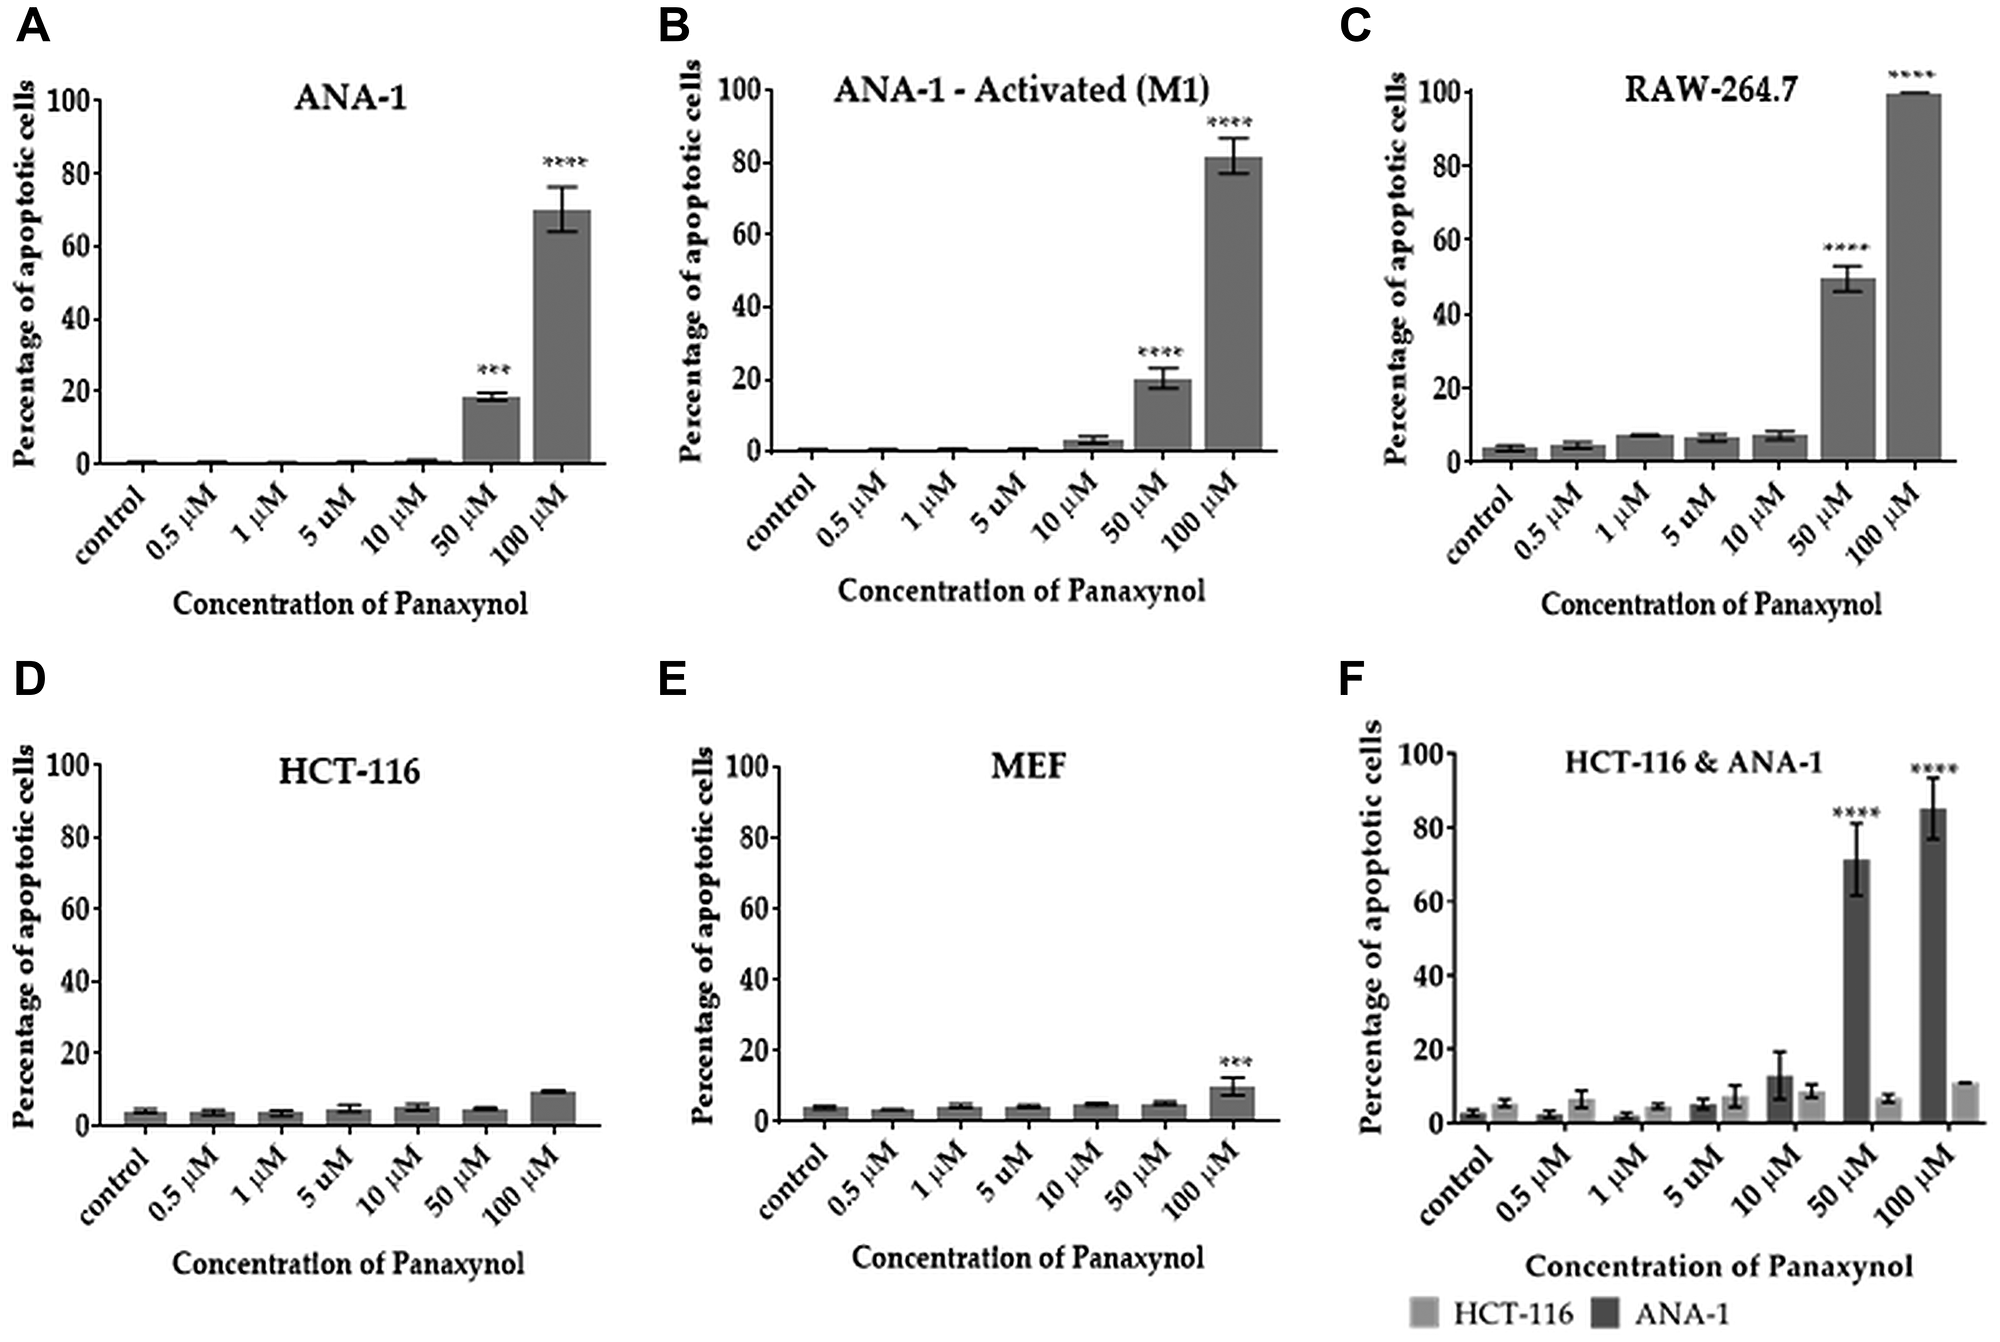 Panaxynol induces apoptosis in macrophages, but not in HCT-116 and MEF cells.